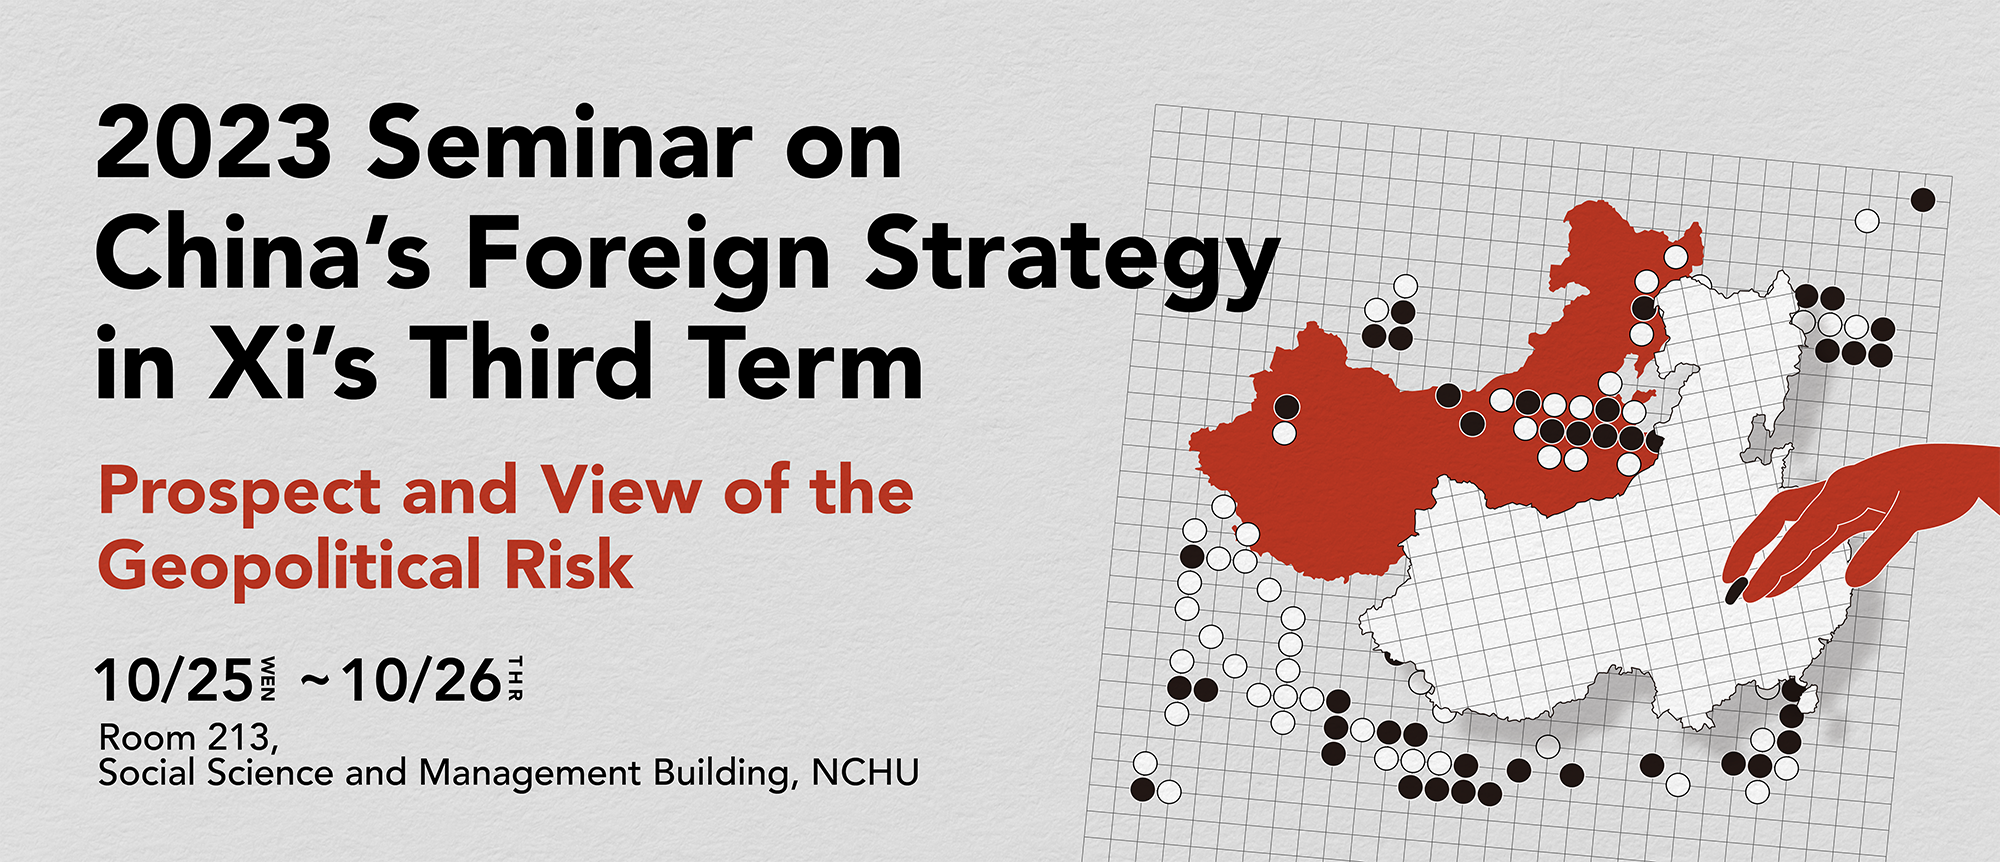 Seminar on China’s Foreign Strategy in Xi’s Third Term: Prospect and View of the Geopolitical Risk